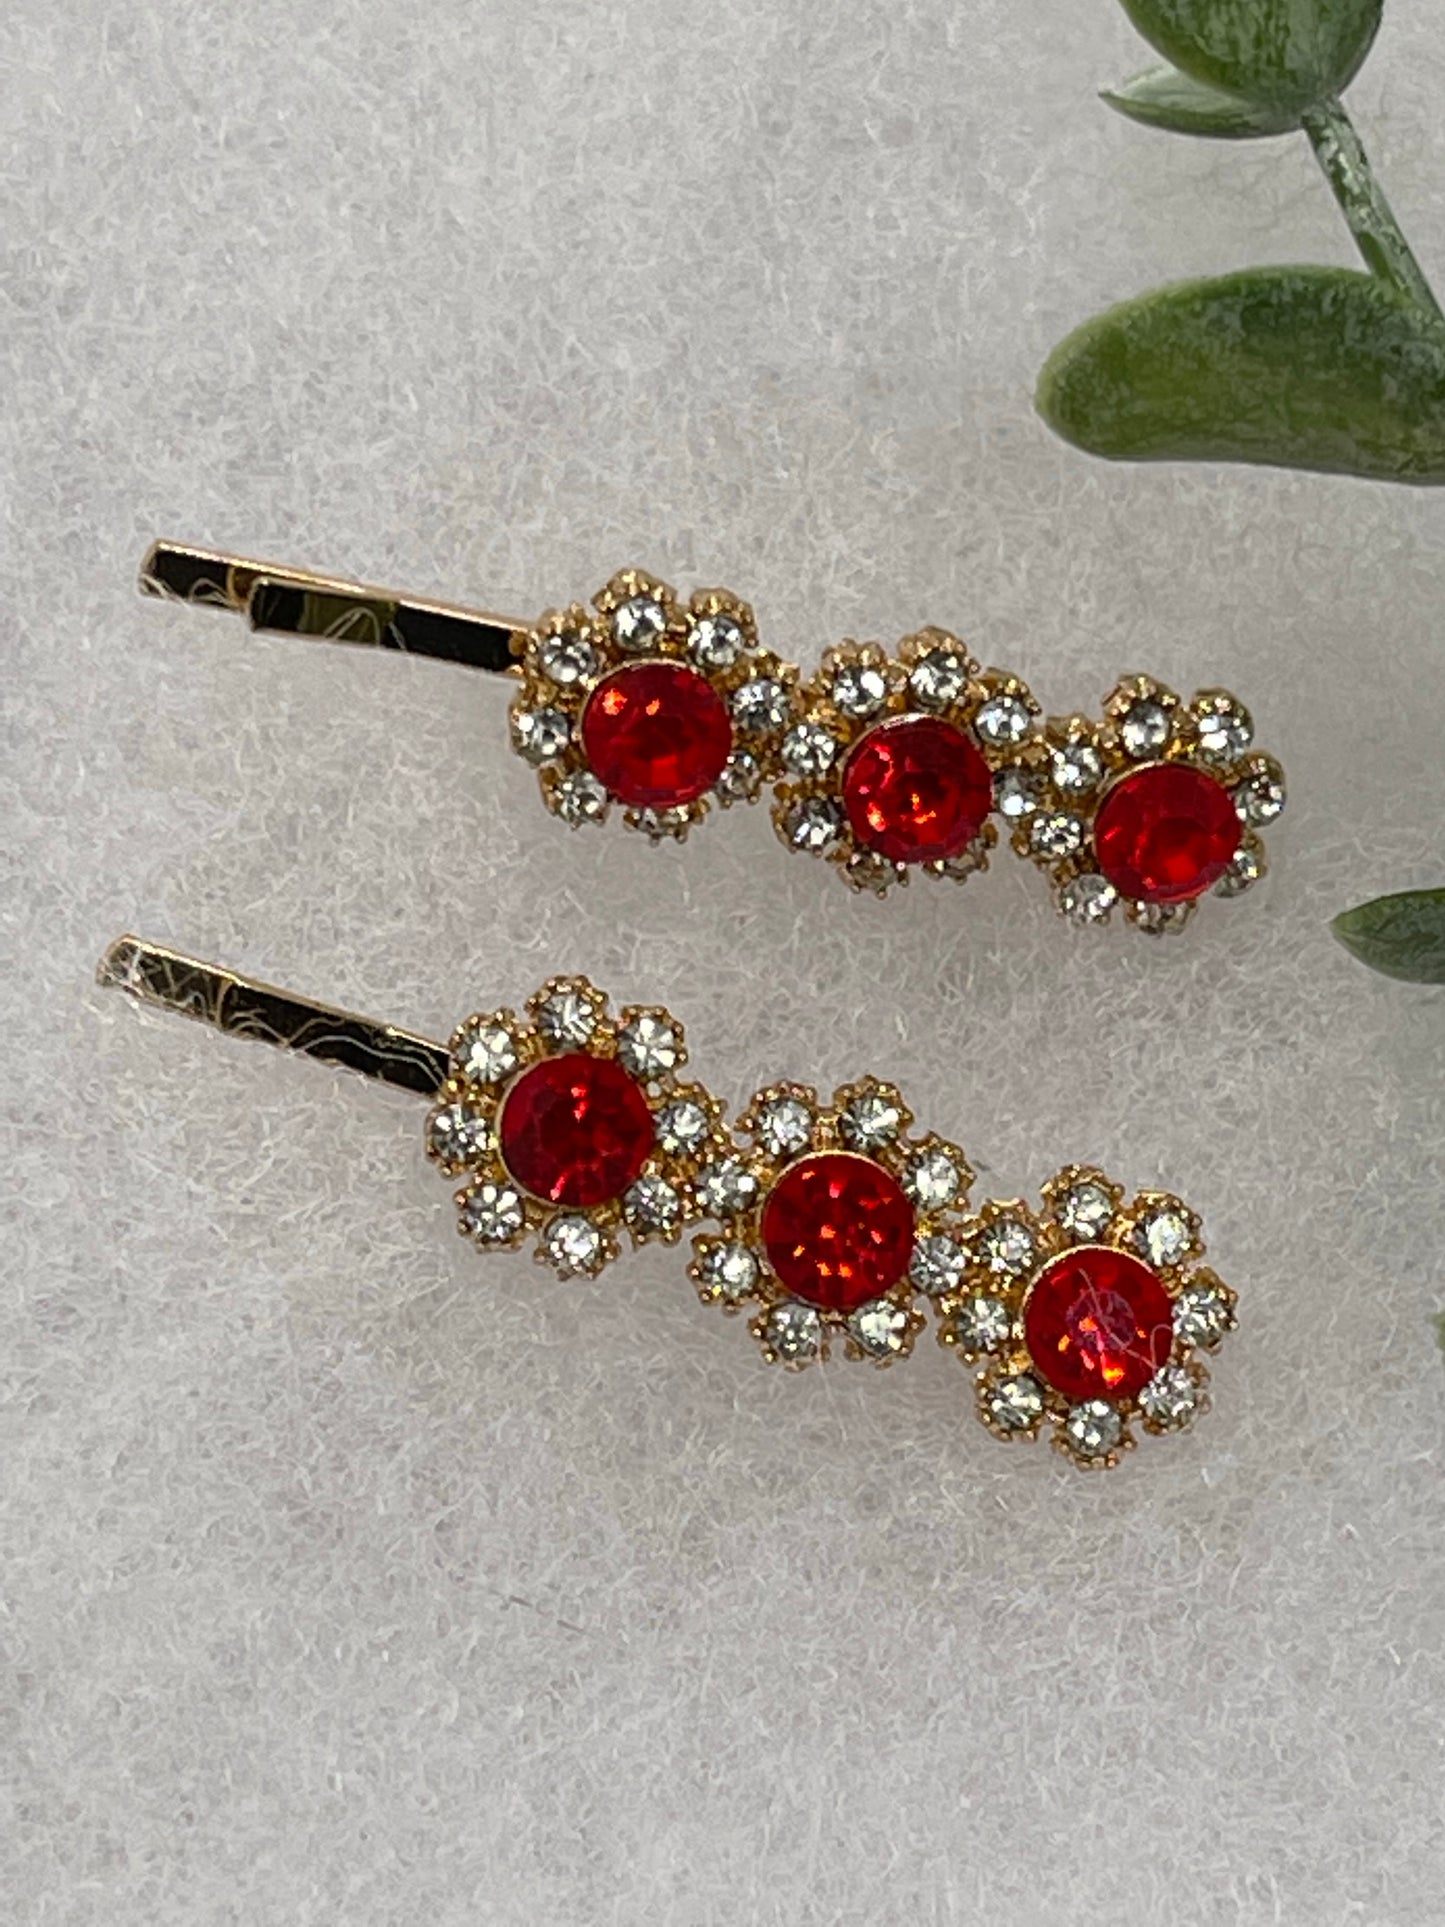 Ruby red crystal rhinestone approximately 2.0” gold tone hair pins 2 pc set wedding bridal shower engagement formal princess accessory accessories